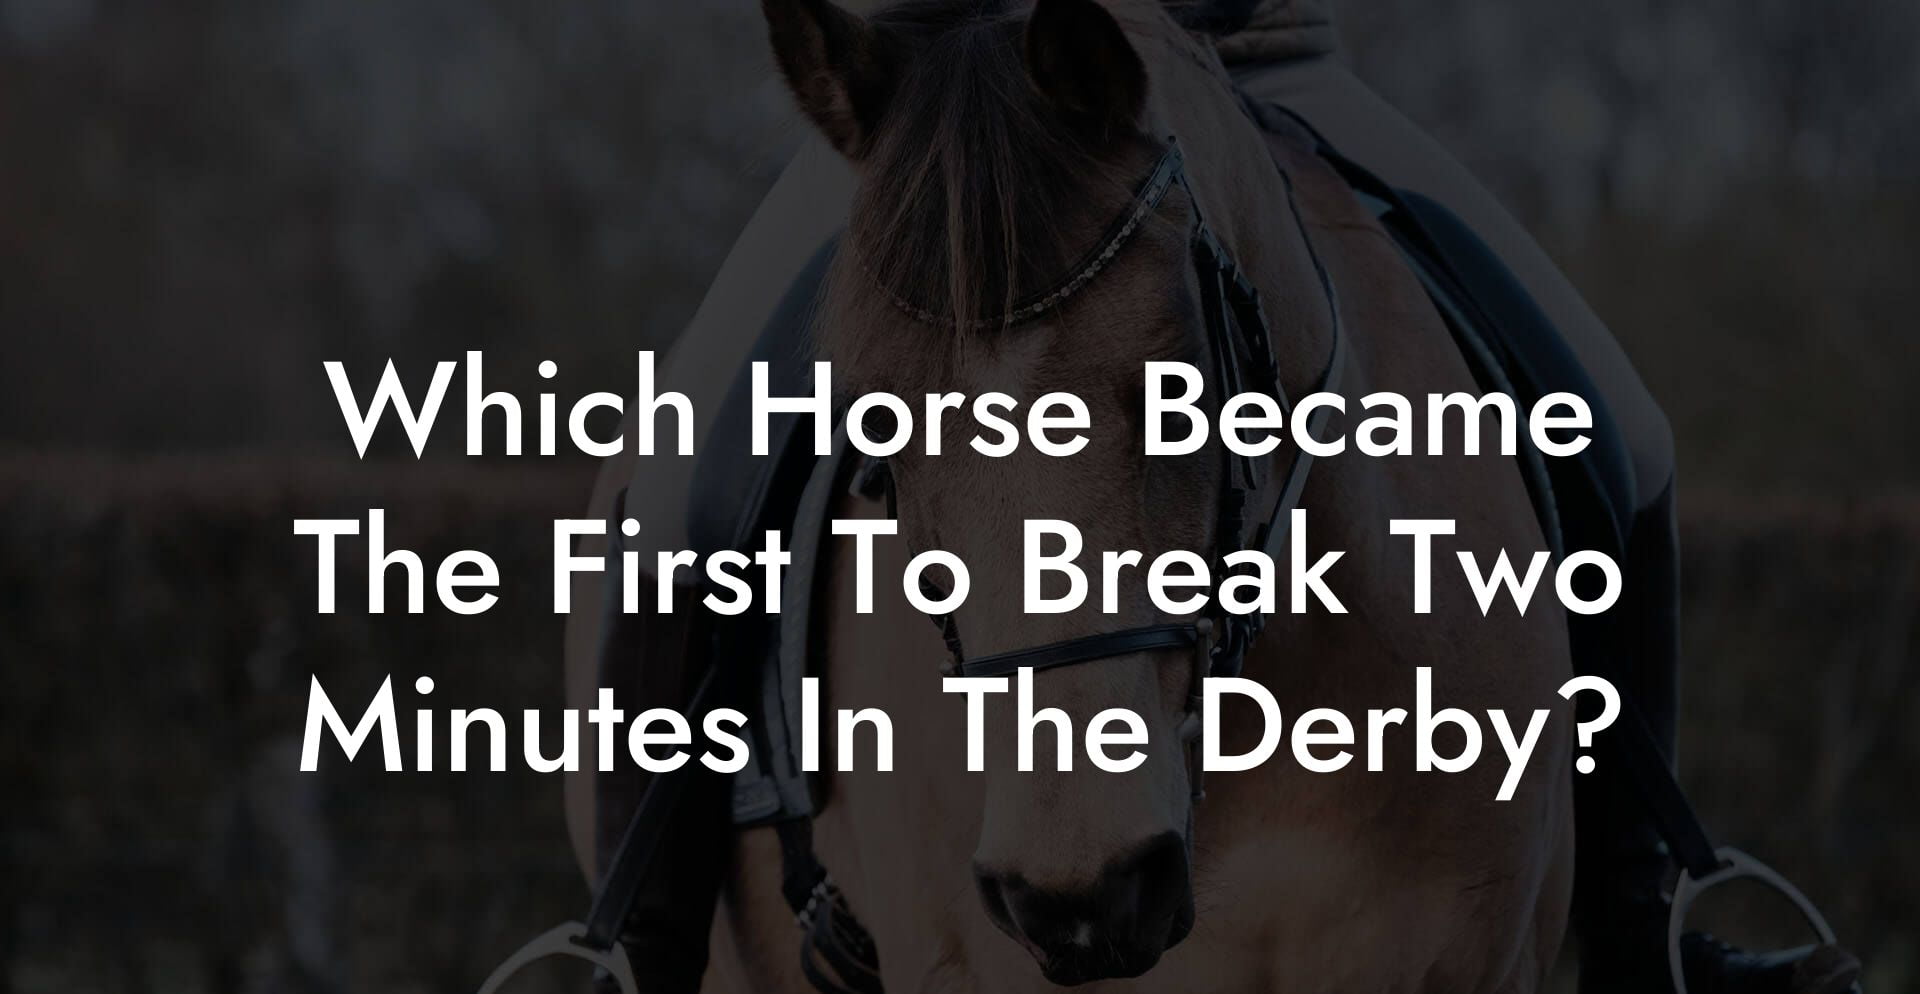 Which Horse Became The First To Break Two Minutes In The Derby?